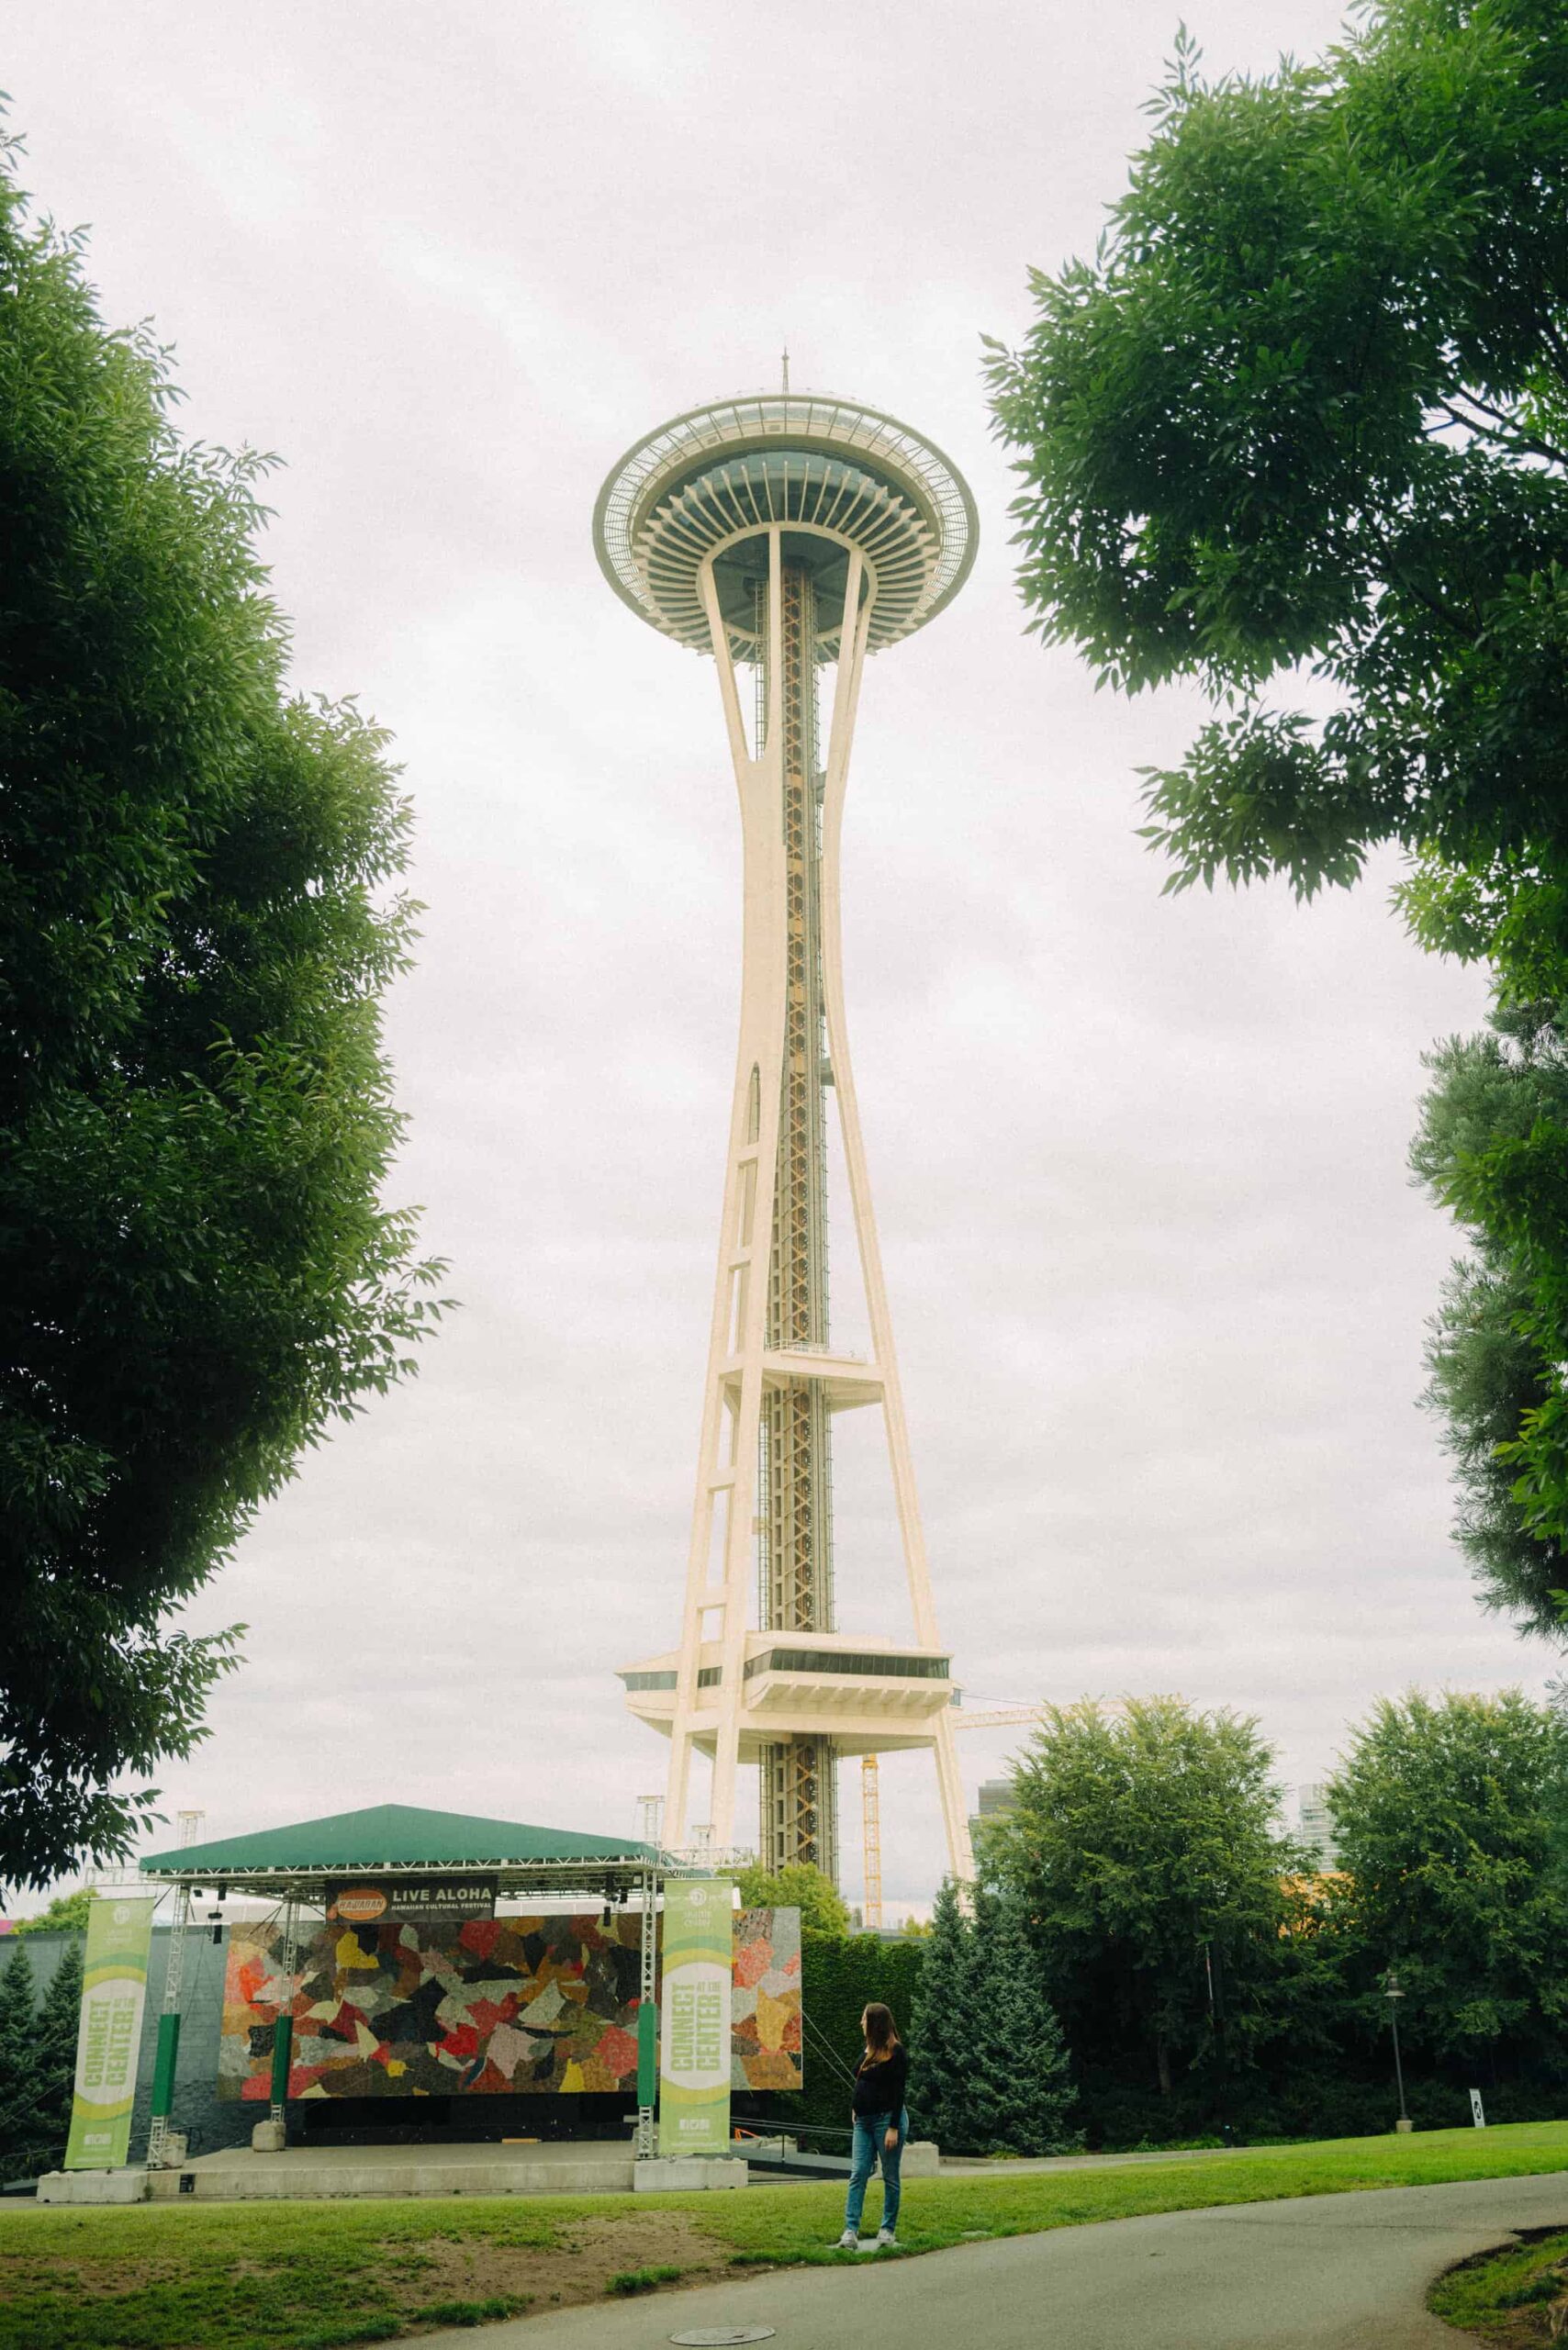 Downtown Seattle - Space Needle